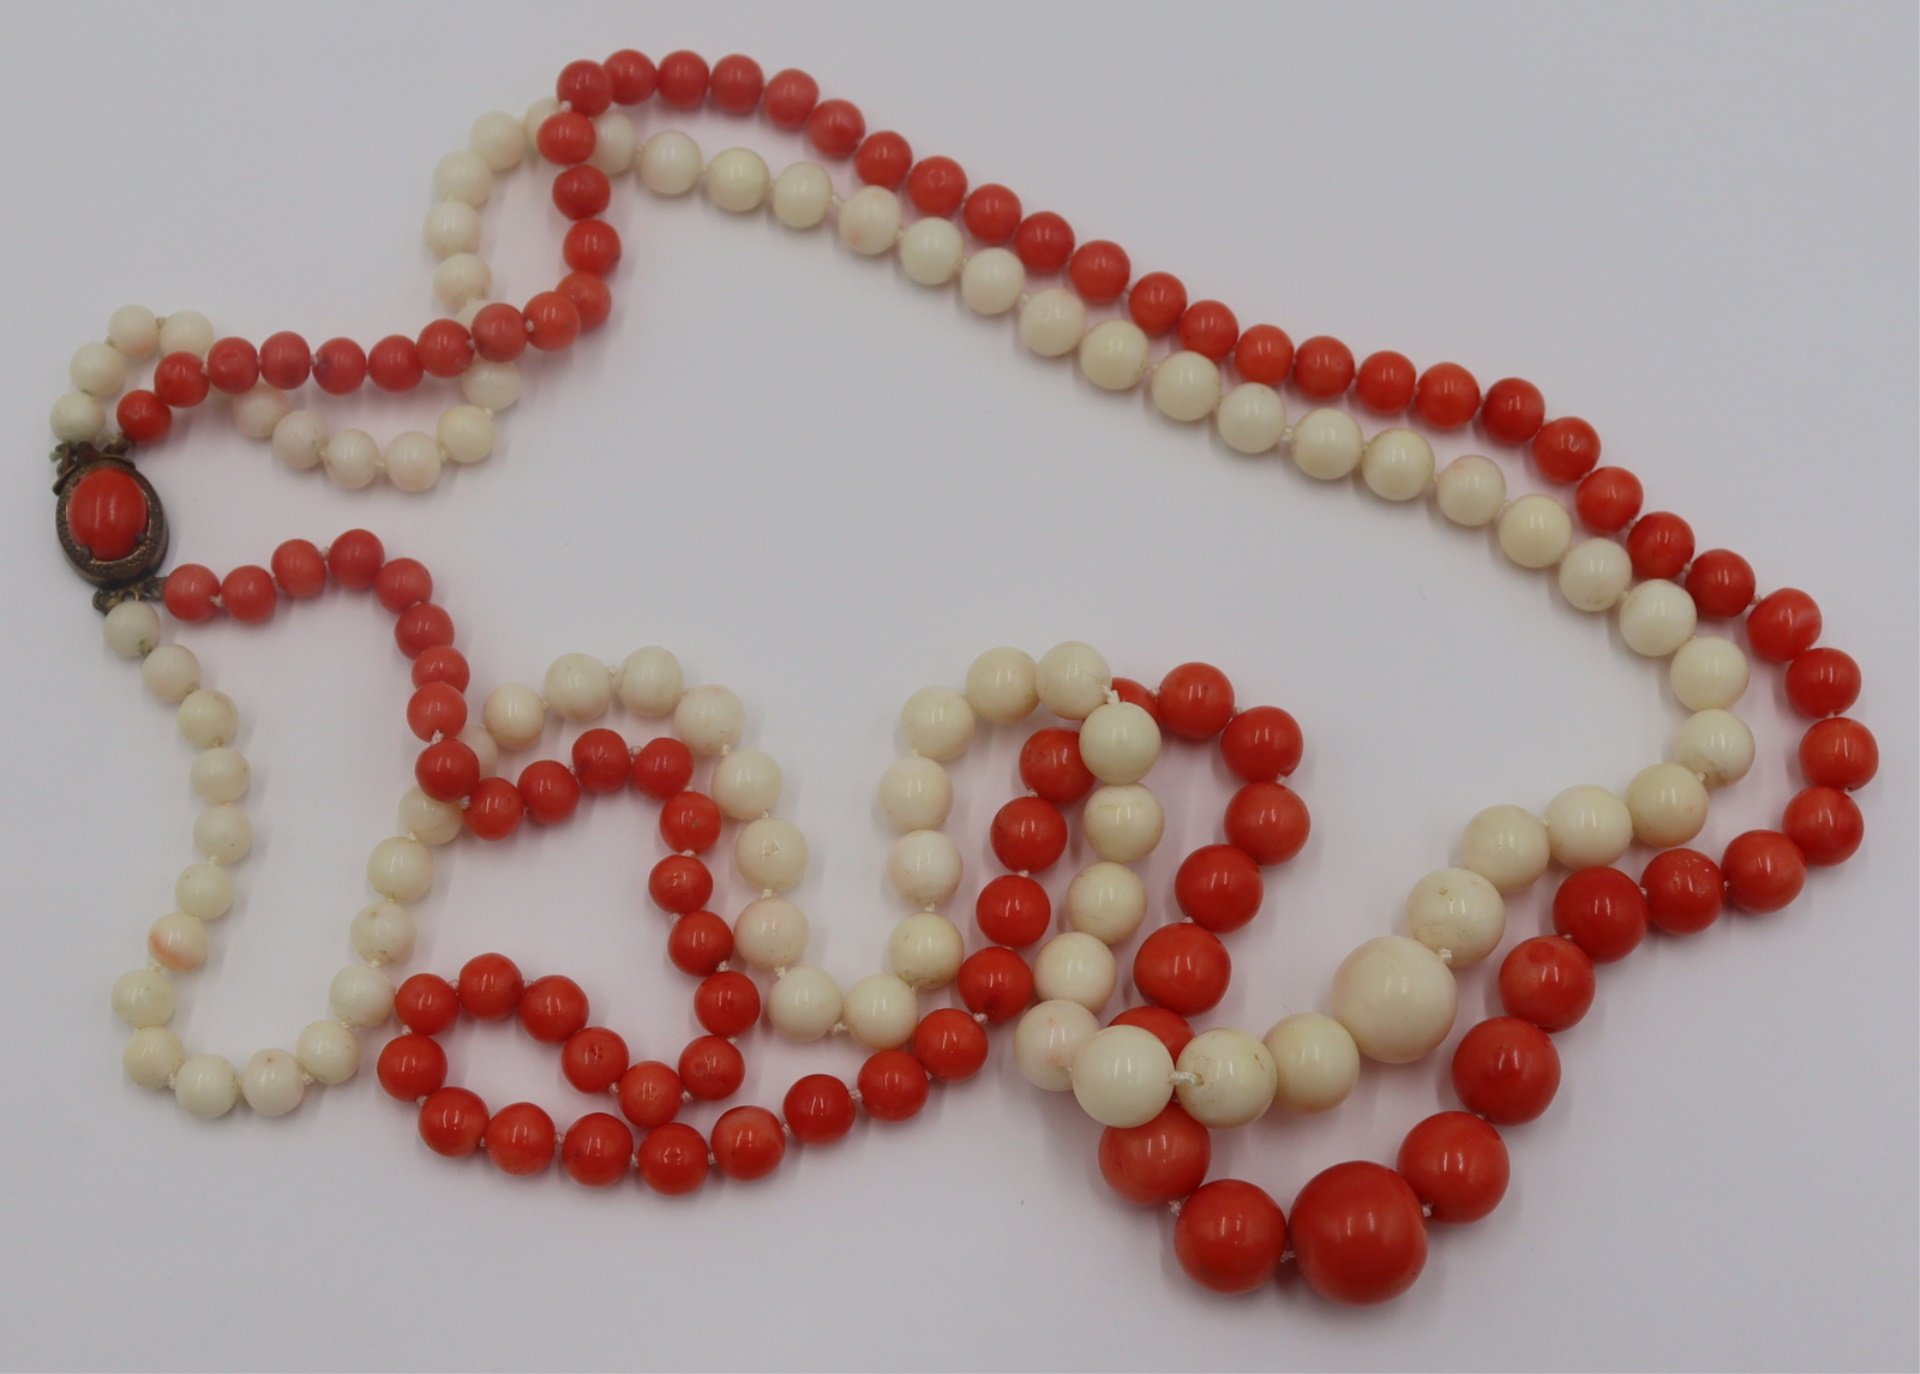 JEWELRY DOUBLE STRAND CARVED CORAL 3bc586